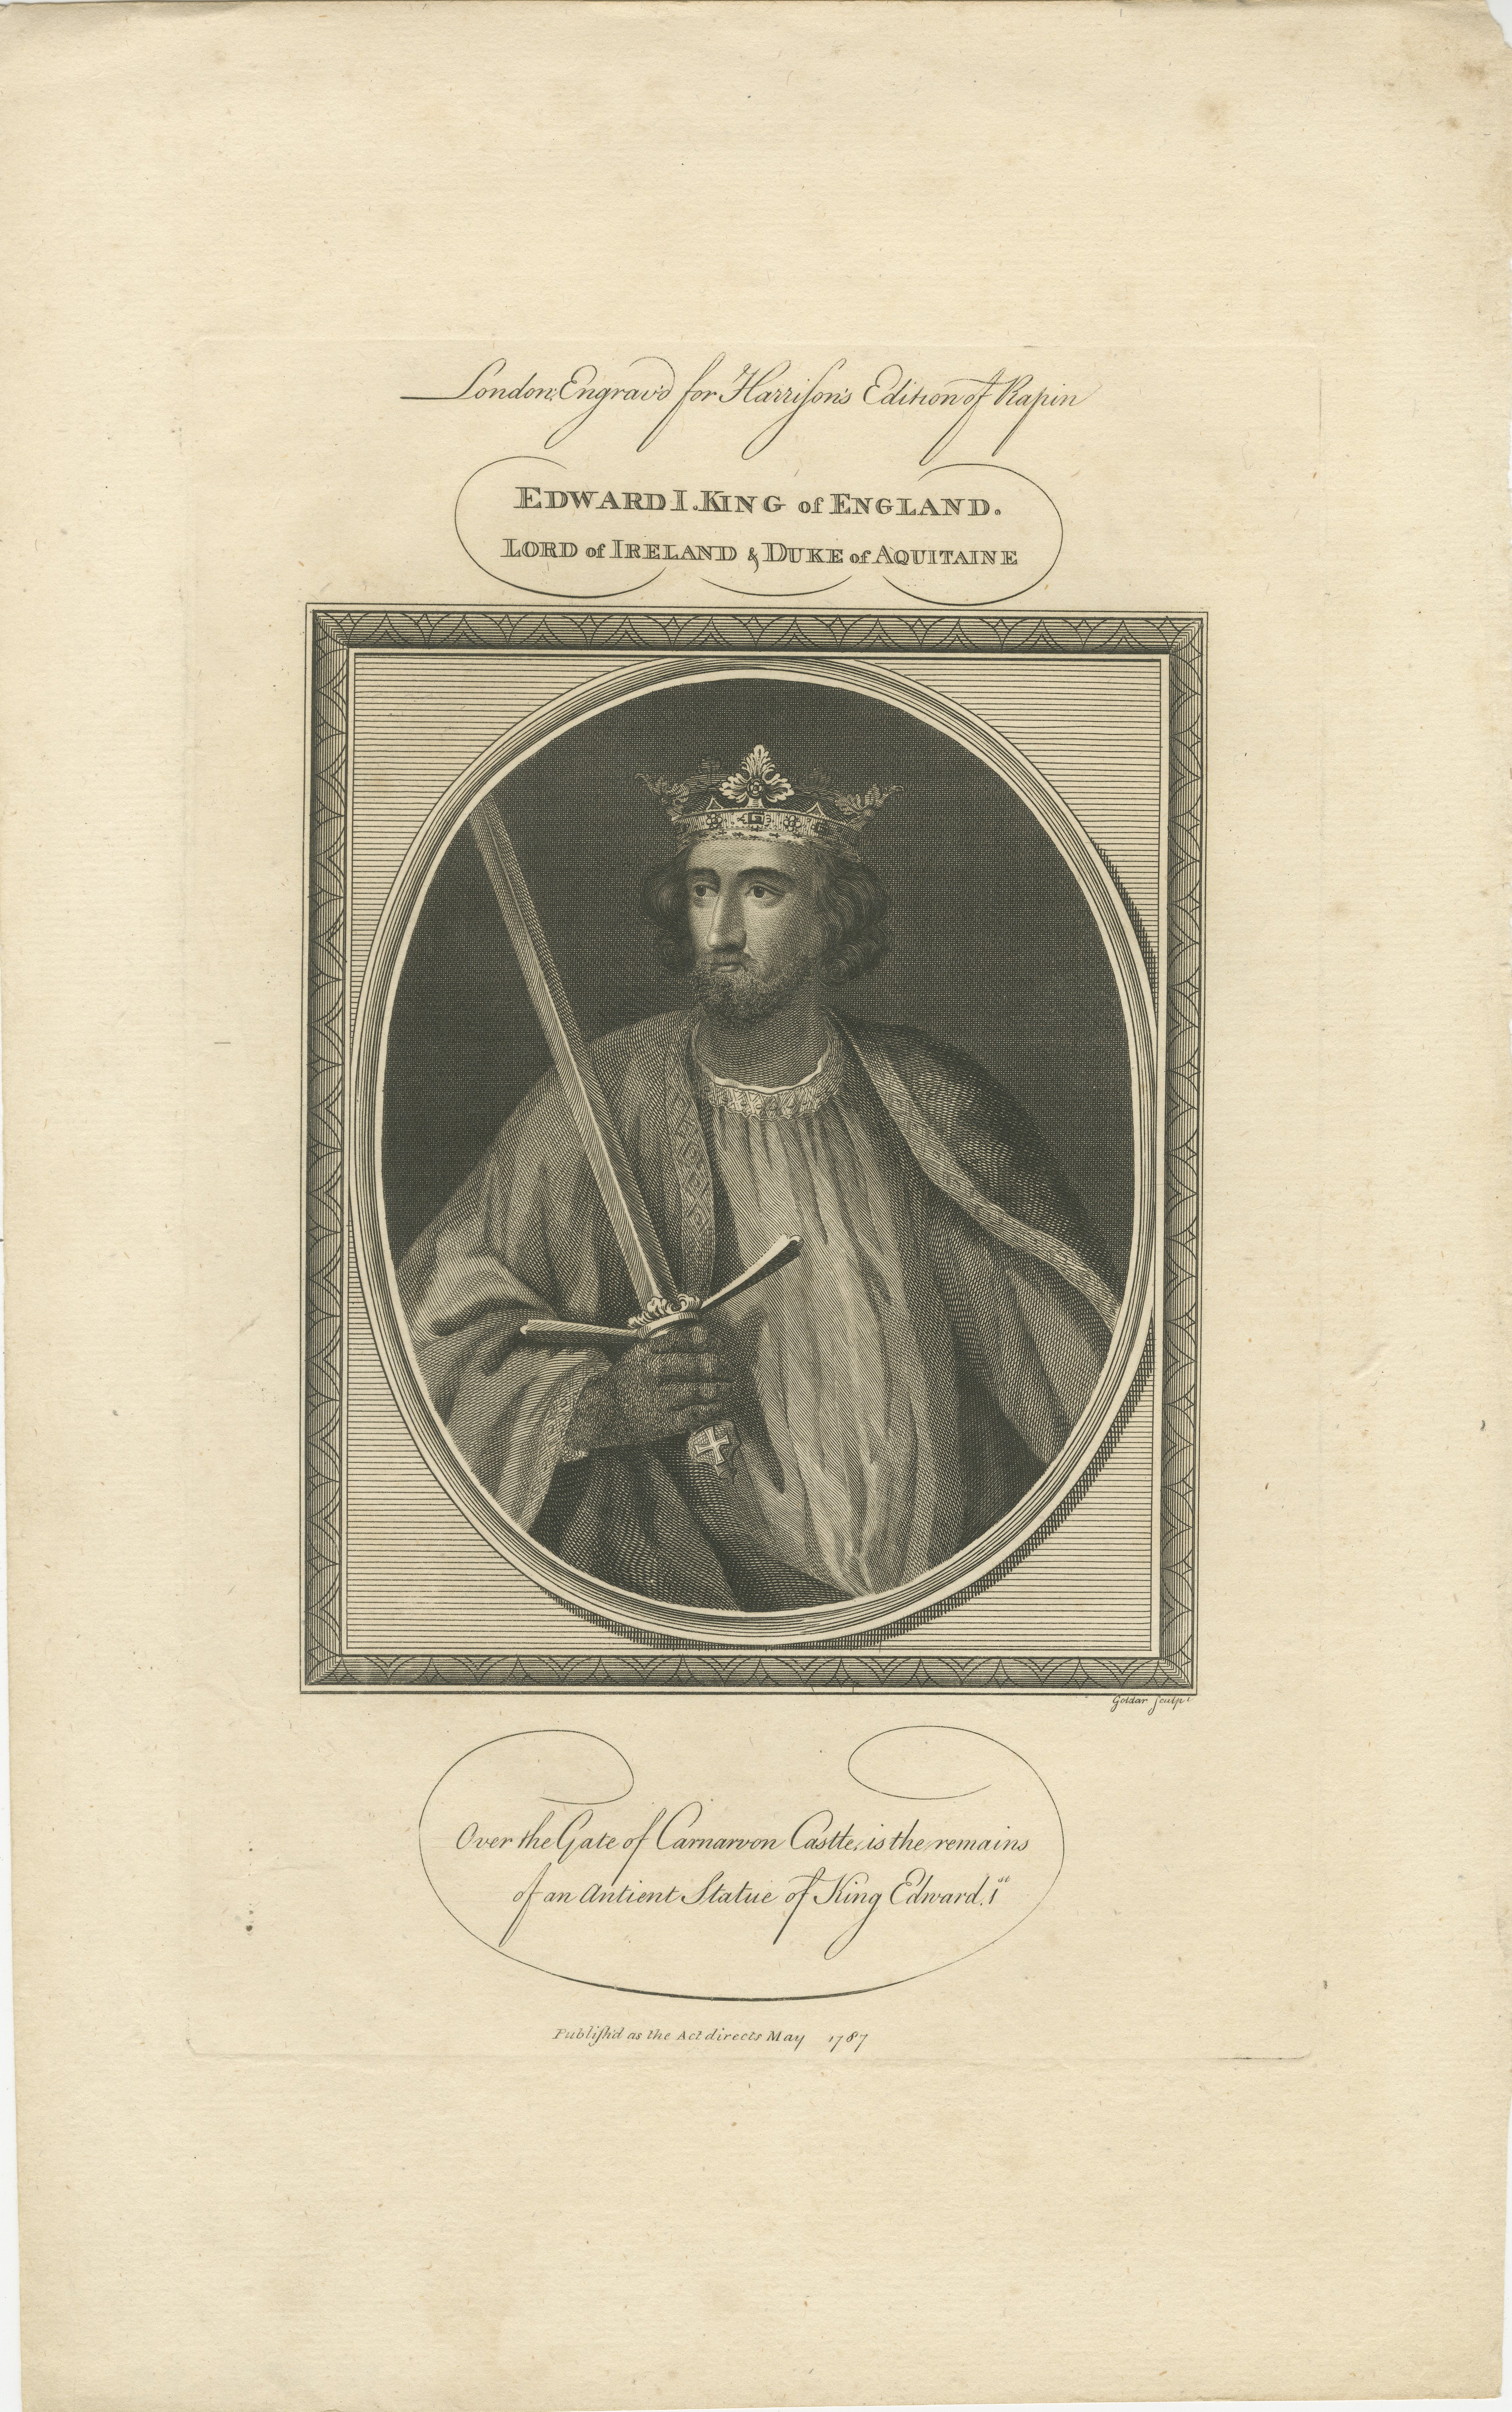 An engraved portrait of Edward I, also known as Edward Longshanks and the Hammer of the Scots, who was King of England from 1272 to 1307. 

The text beneath the image indicates that the engraving is based on the remains of an ancient statue of King